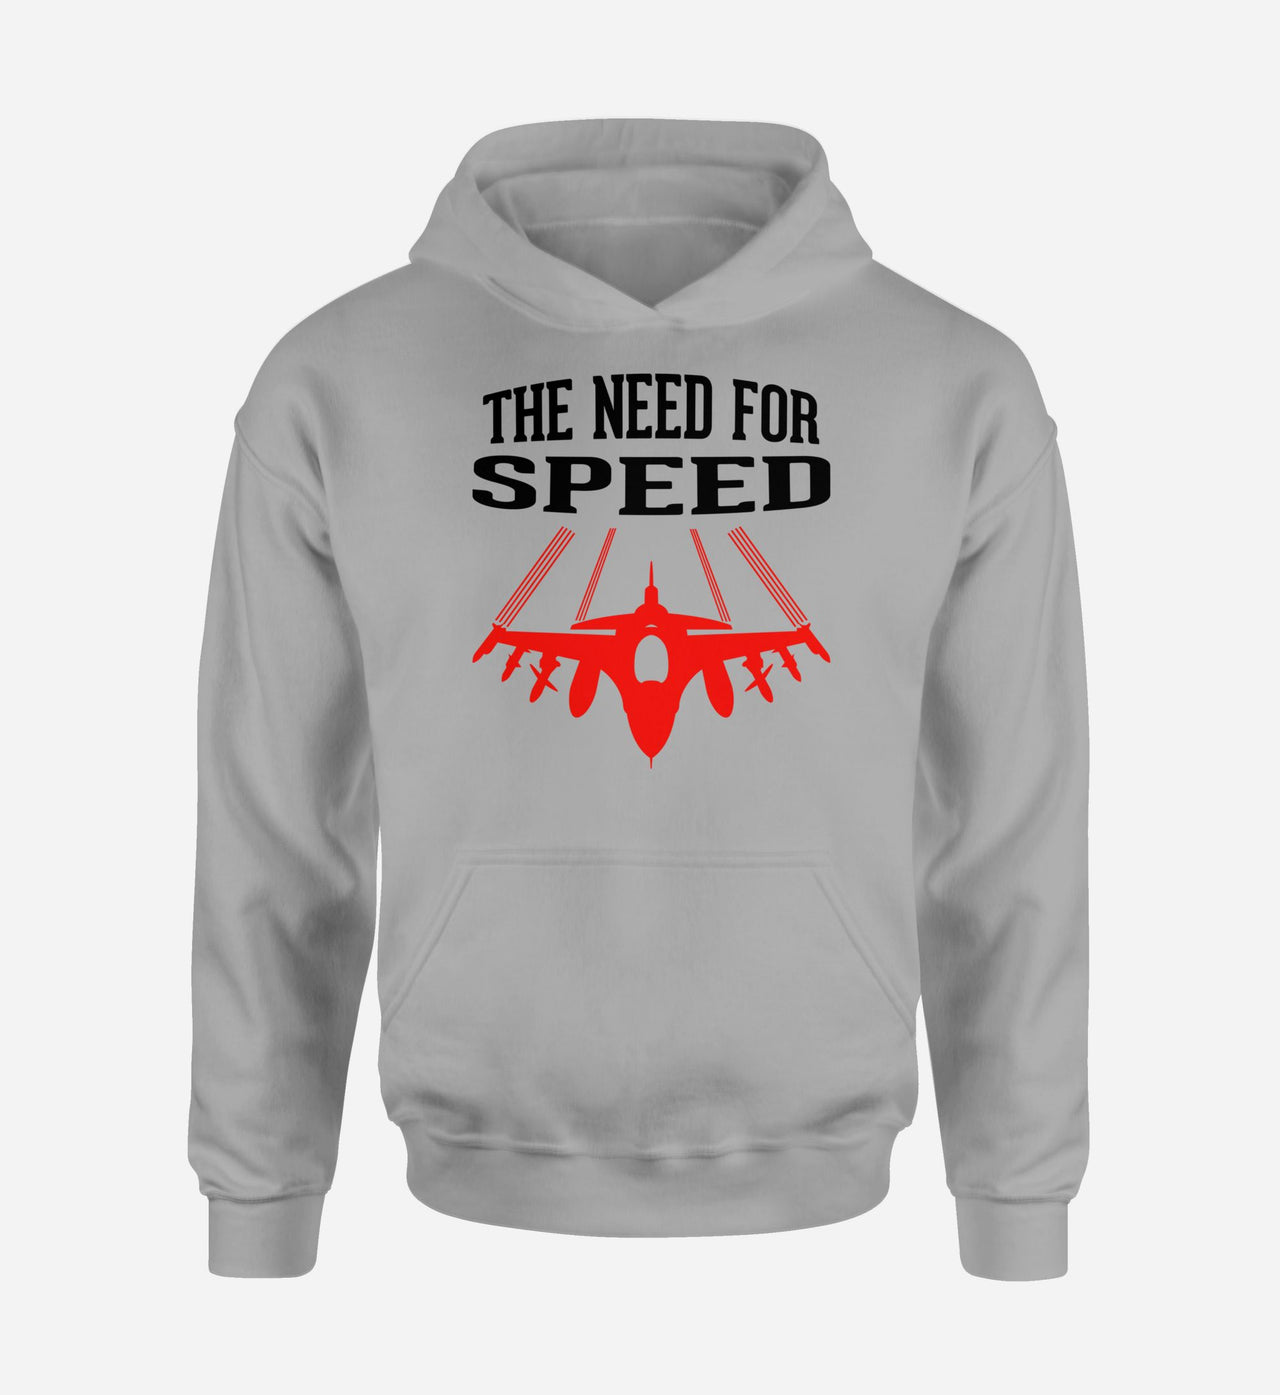 The Need For Speed Designed Hoodies